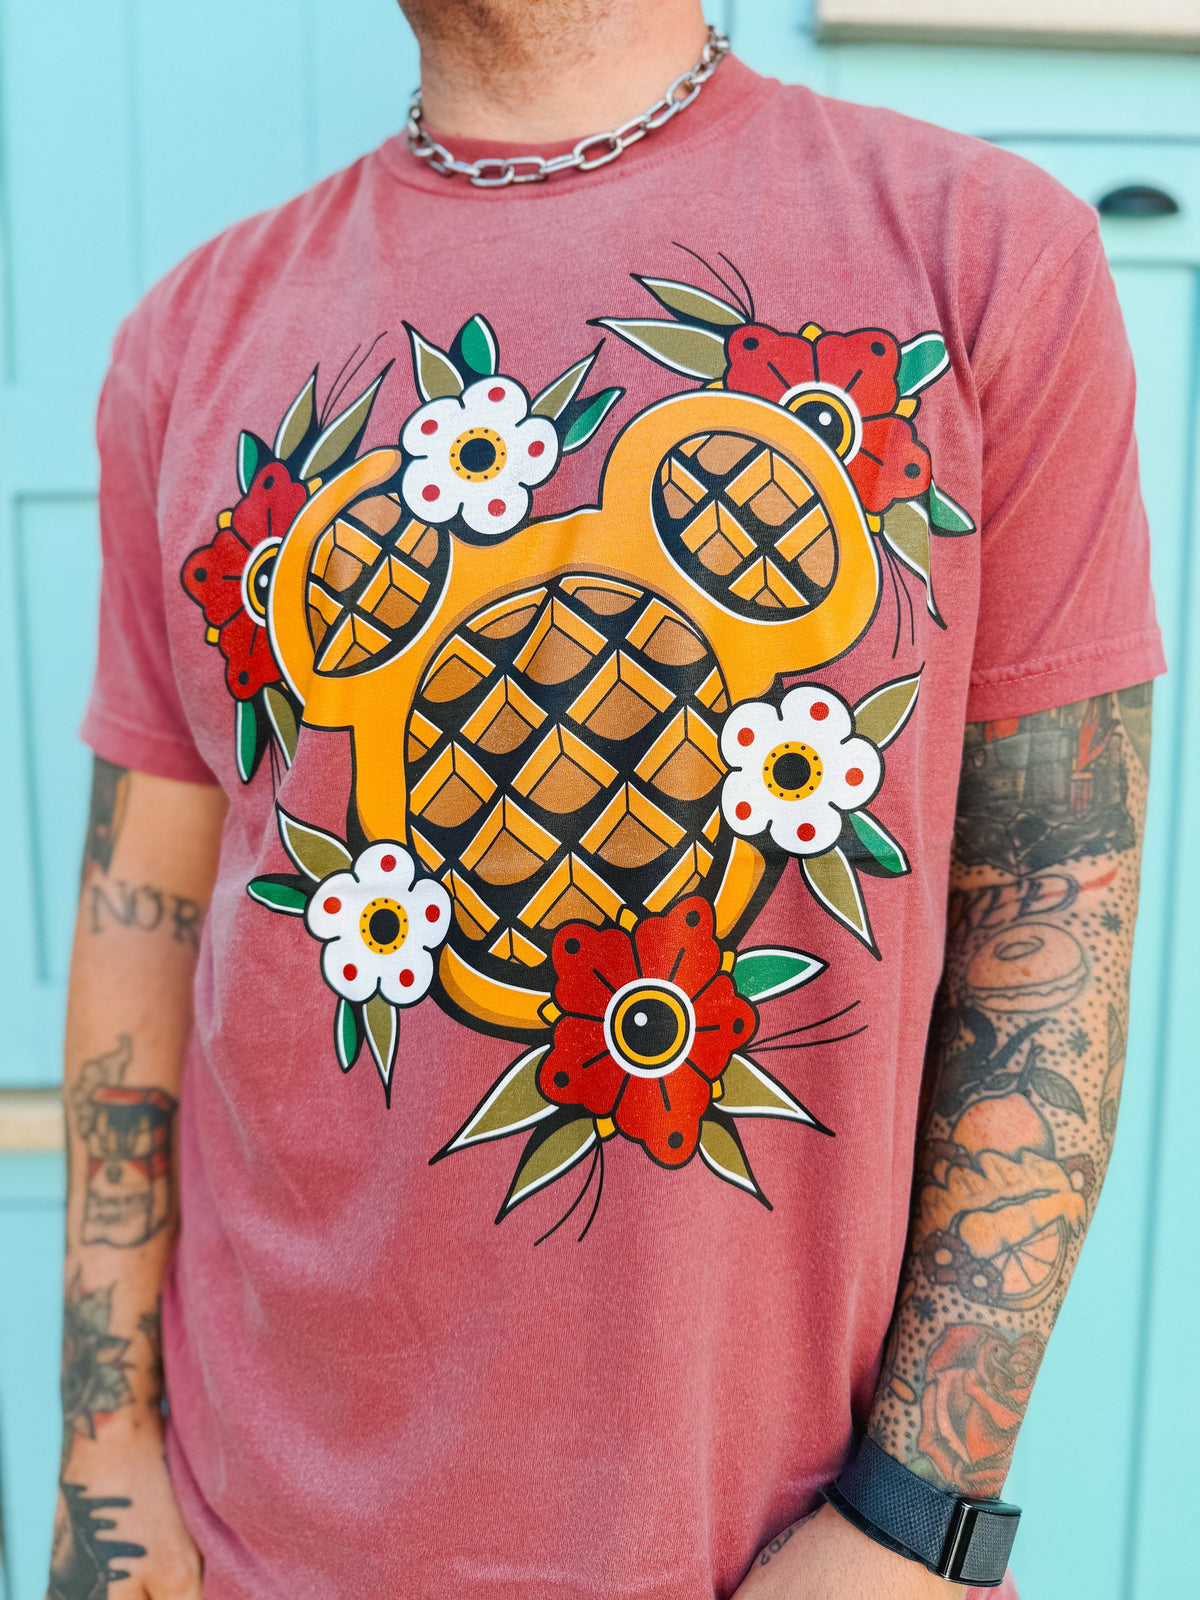 The lost bros Your Favorite Waffle Tattoo Tee